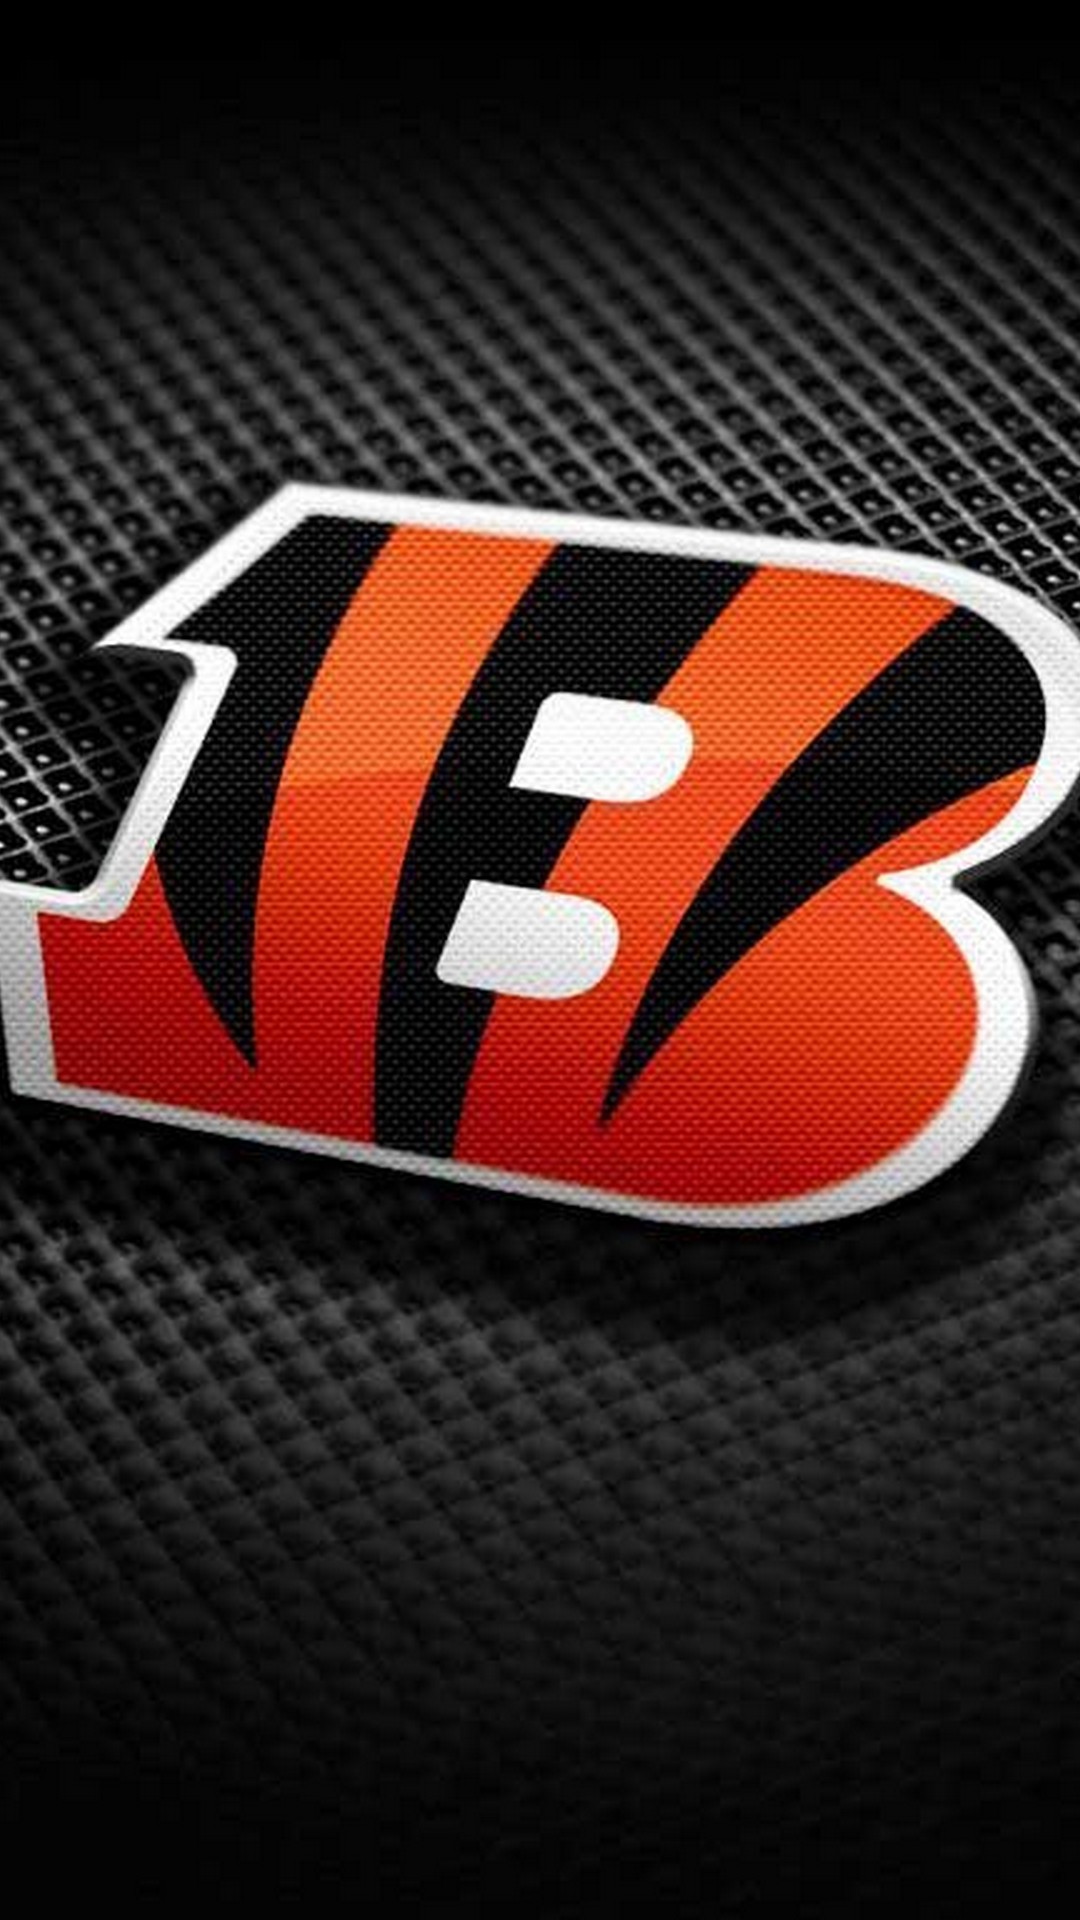 Cincinnati Bengals iPhone Wallpaper Size With high-resolution 1080X1920 pixel. Donwload and set as wallpaper for your iPhone X, iPhone XS home screen backgrounds, XS Max, XR, iPhone8 lock screen wallpaper, iPhone 7, 6, SE, and other mobile devices